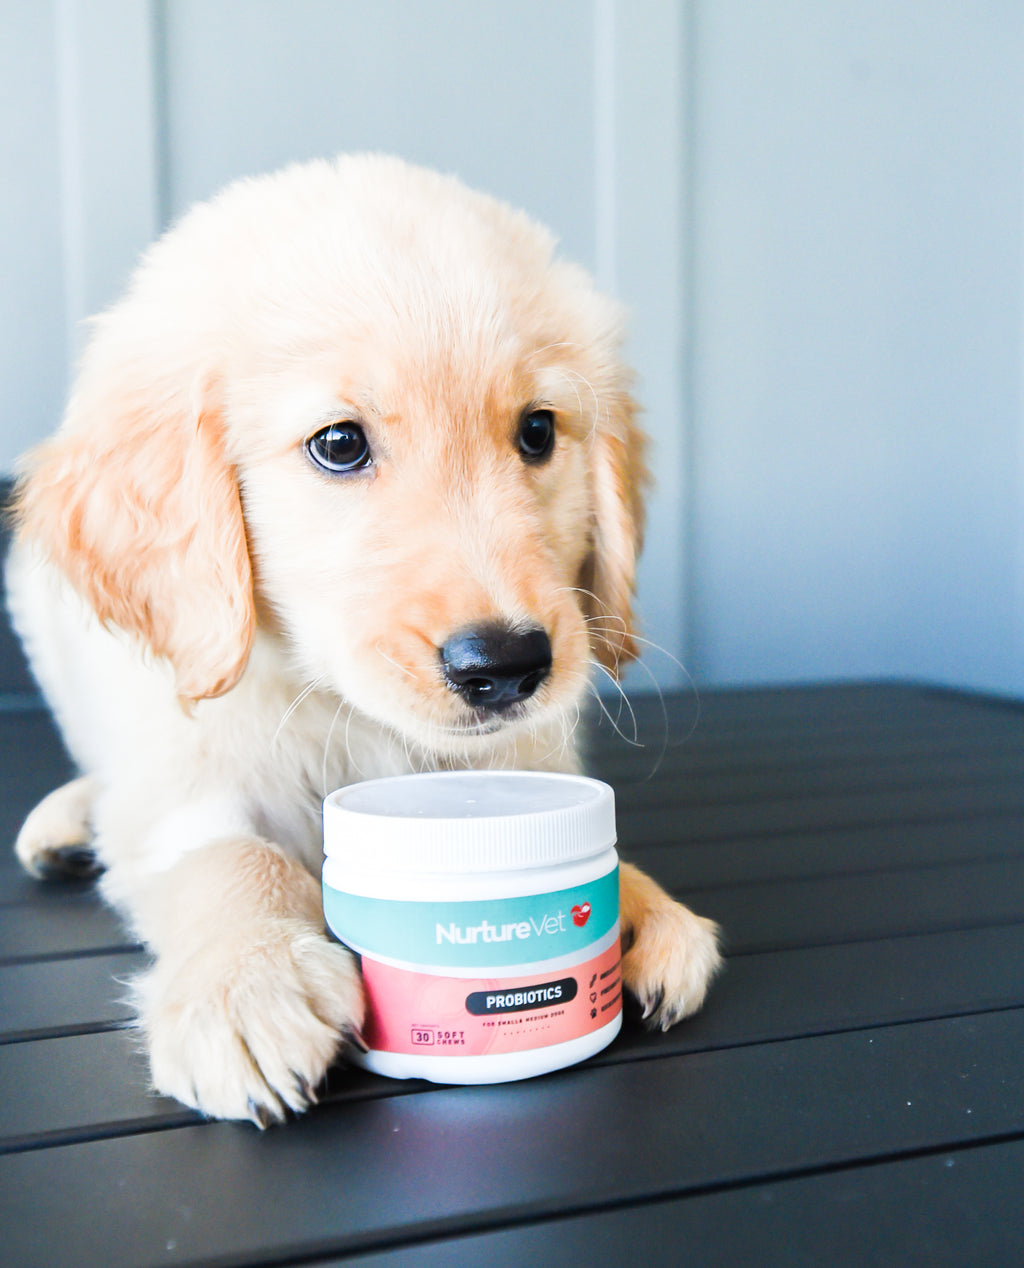 When to give my dog probiotics?